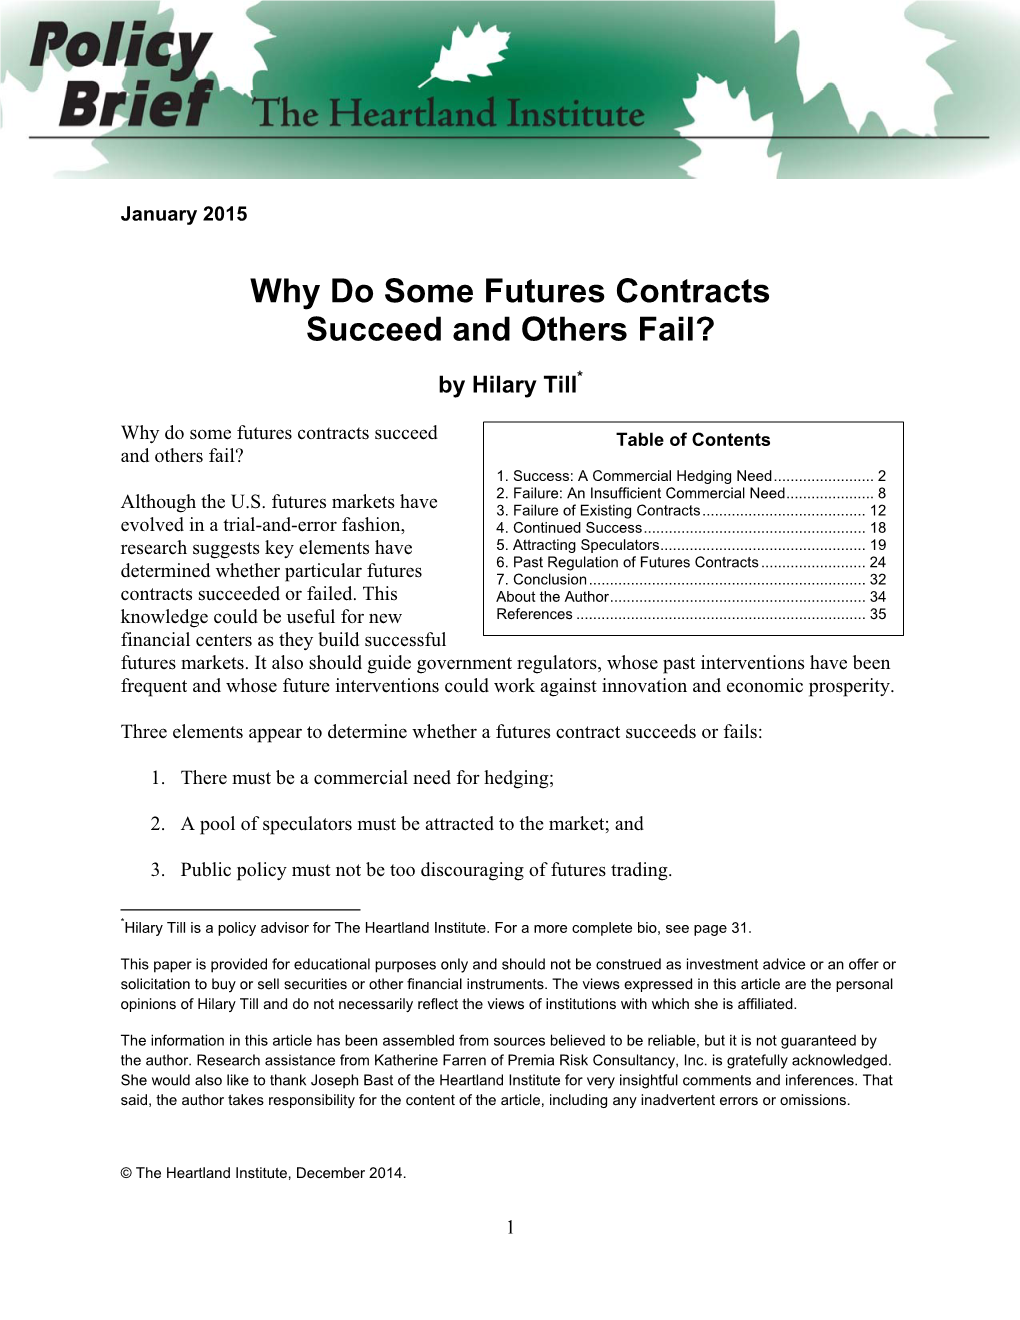 Why Do Some Futures Contracts Succeed and Others Fail?